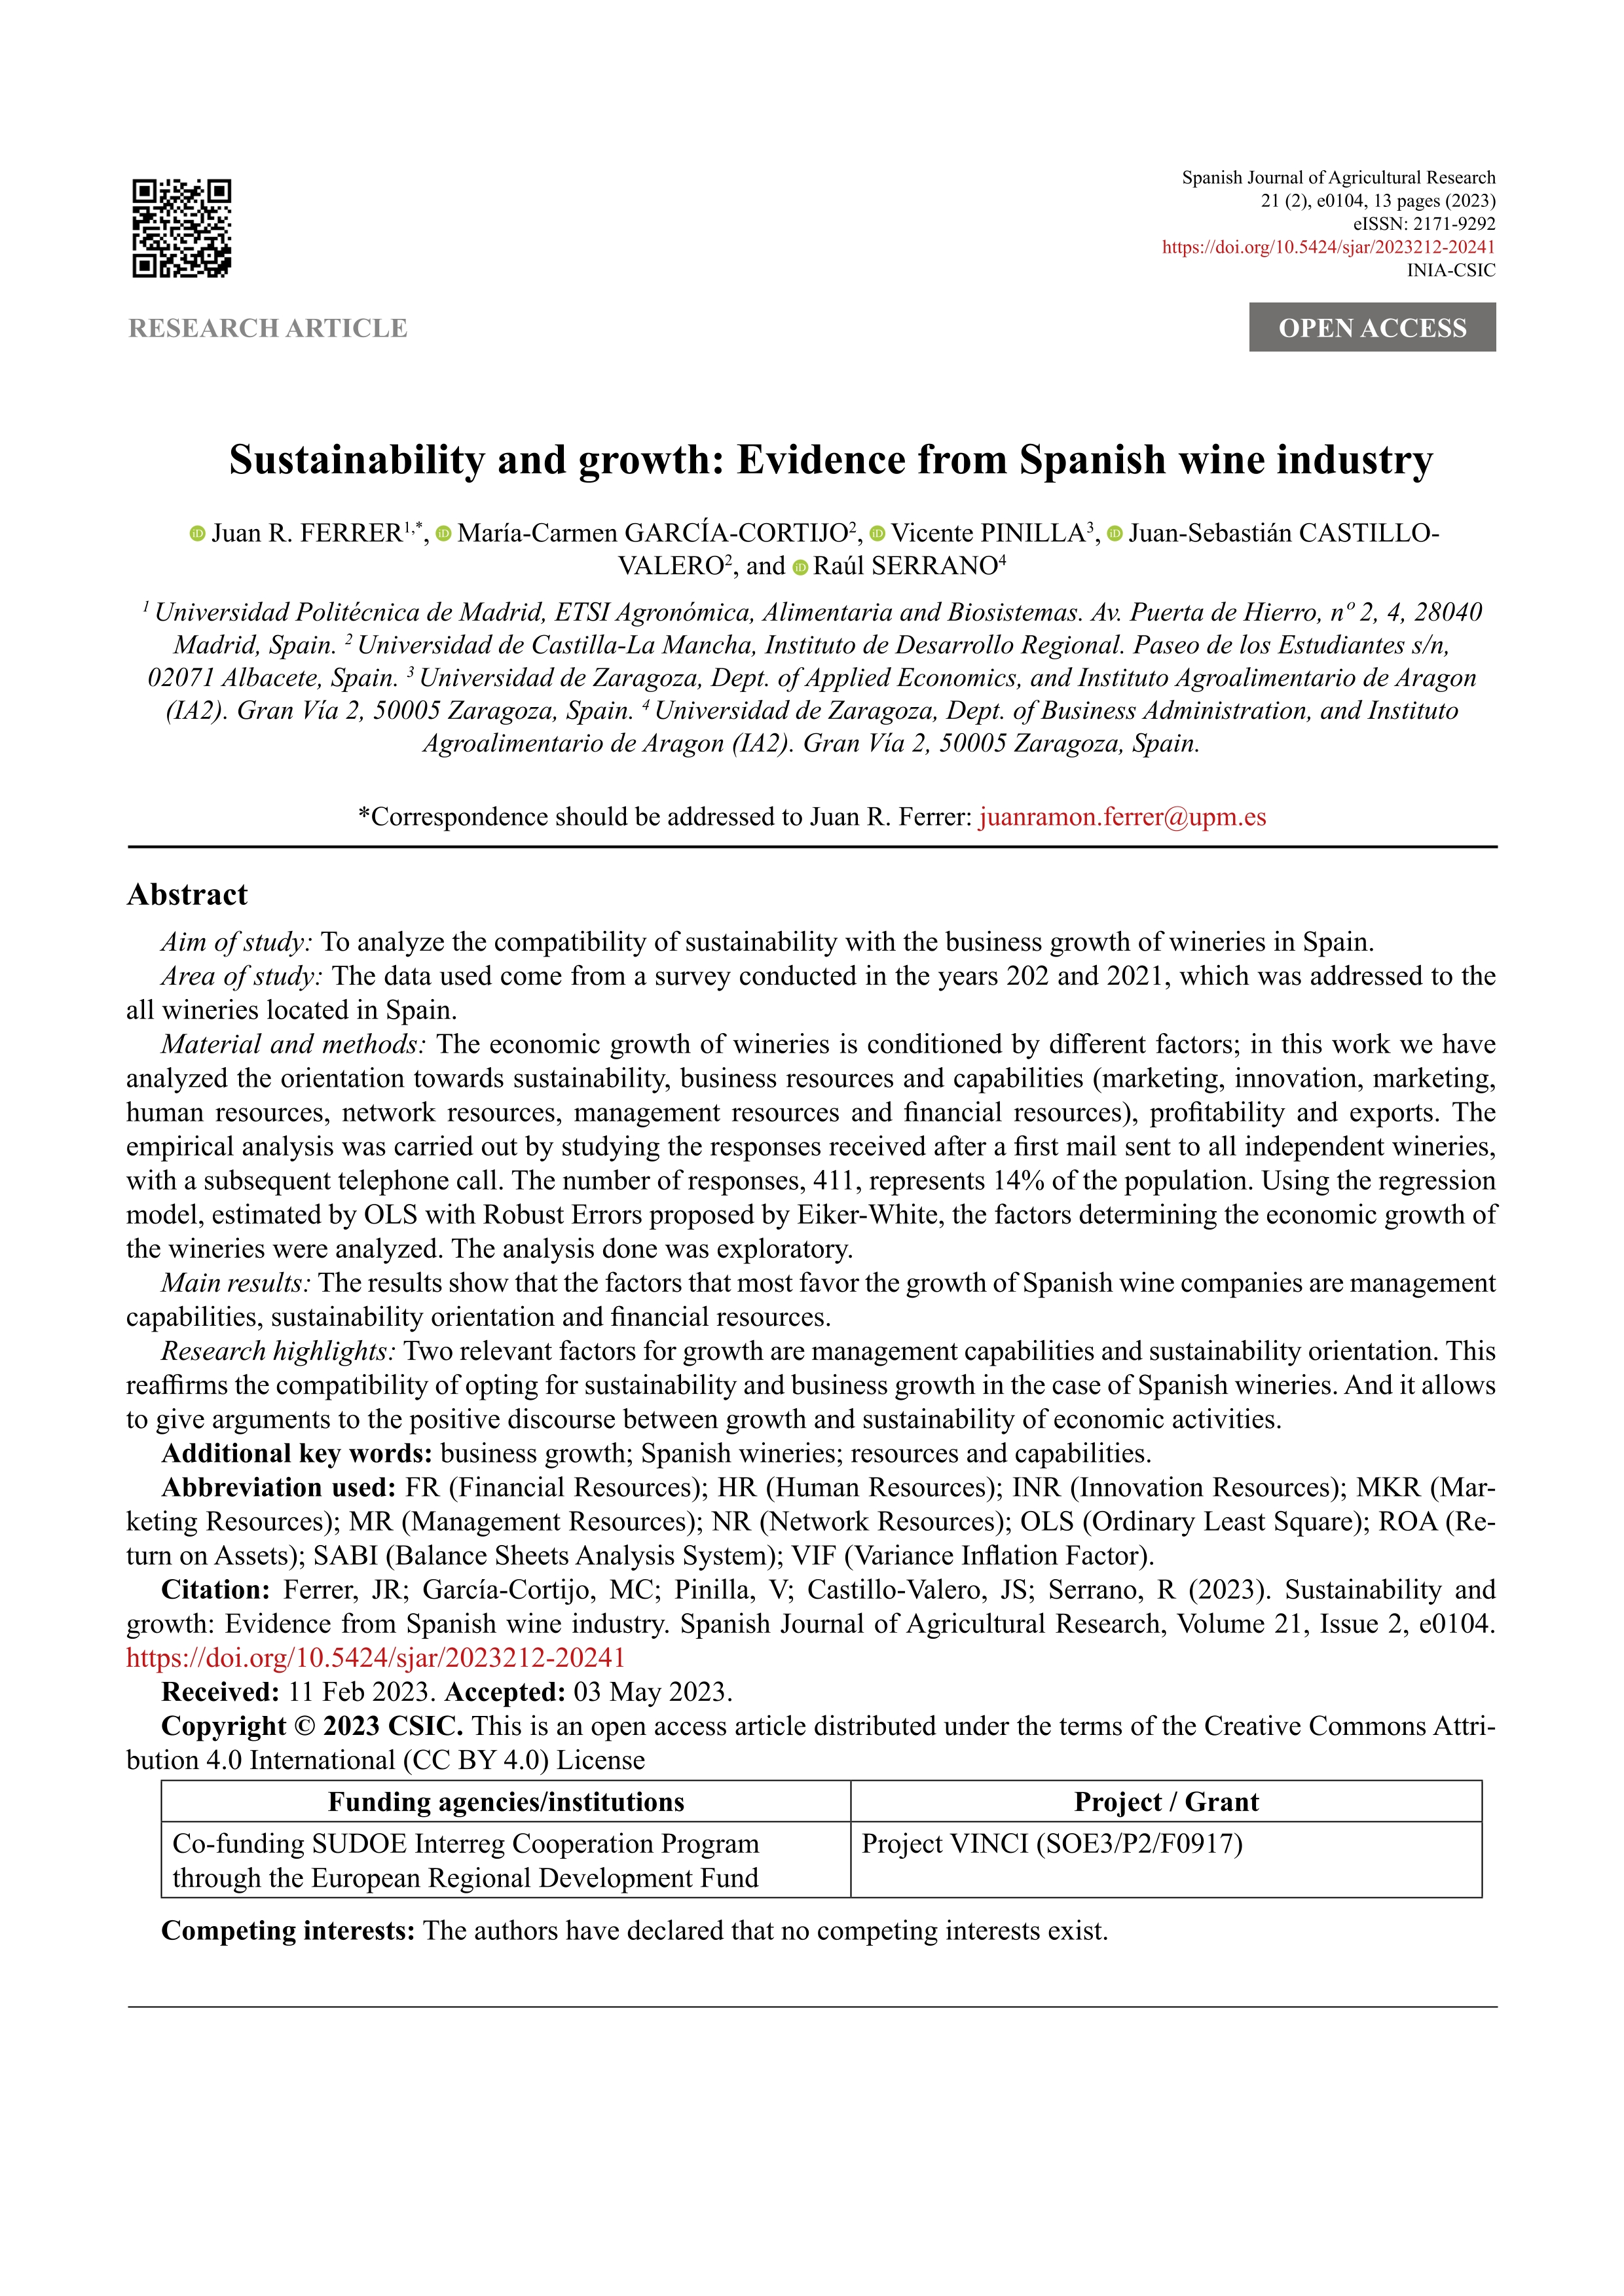 Sustainability and growth: evidence from Spanish wine industry